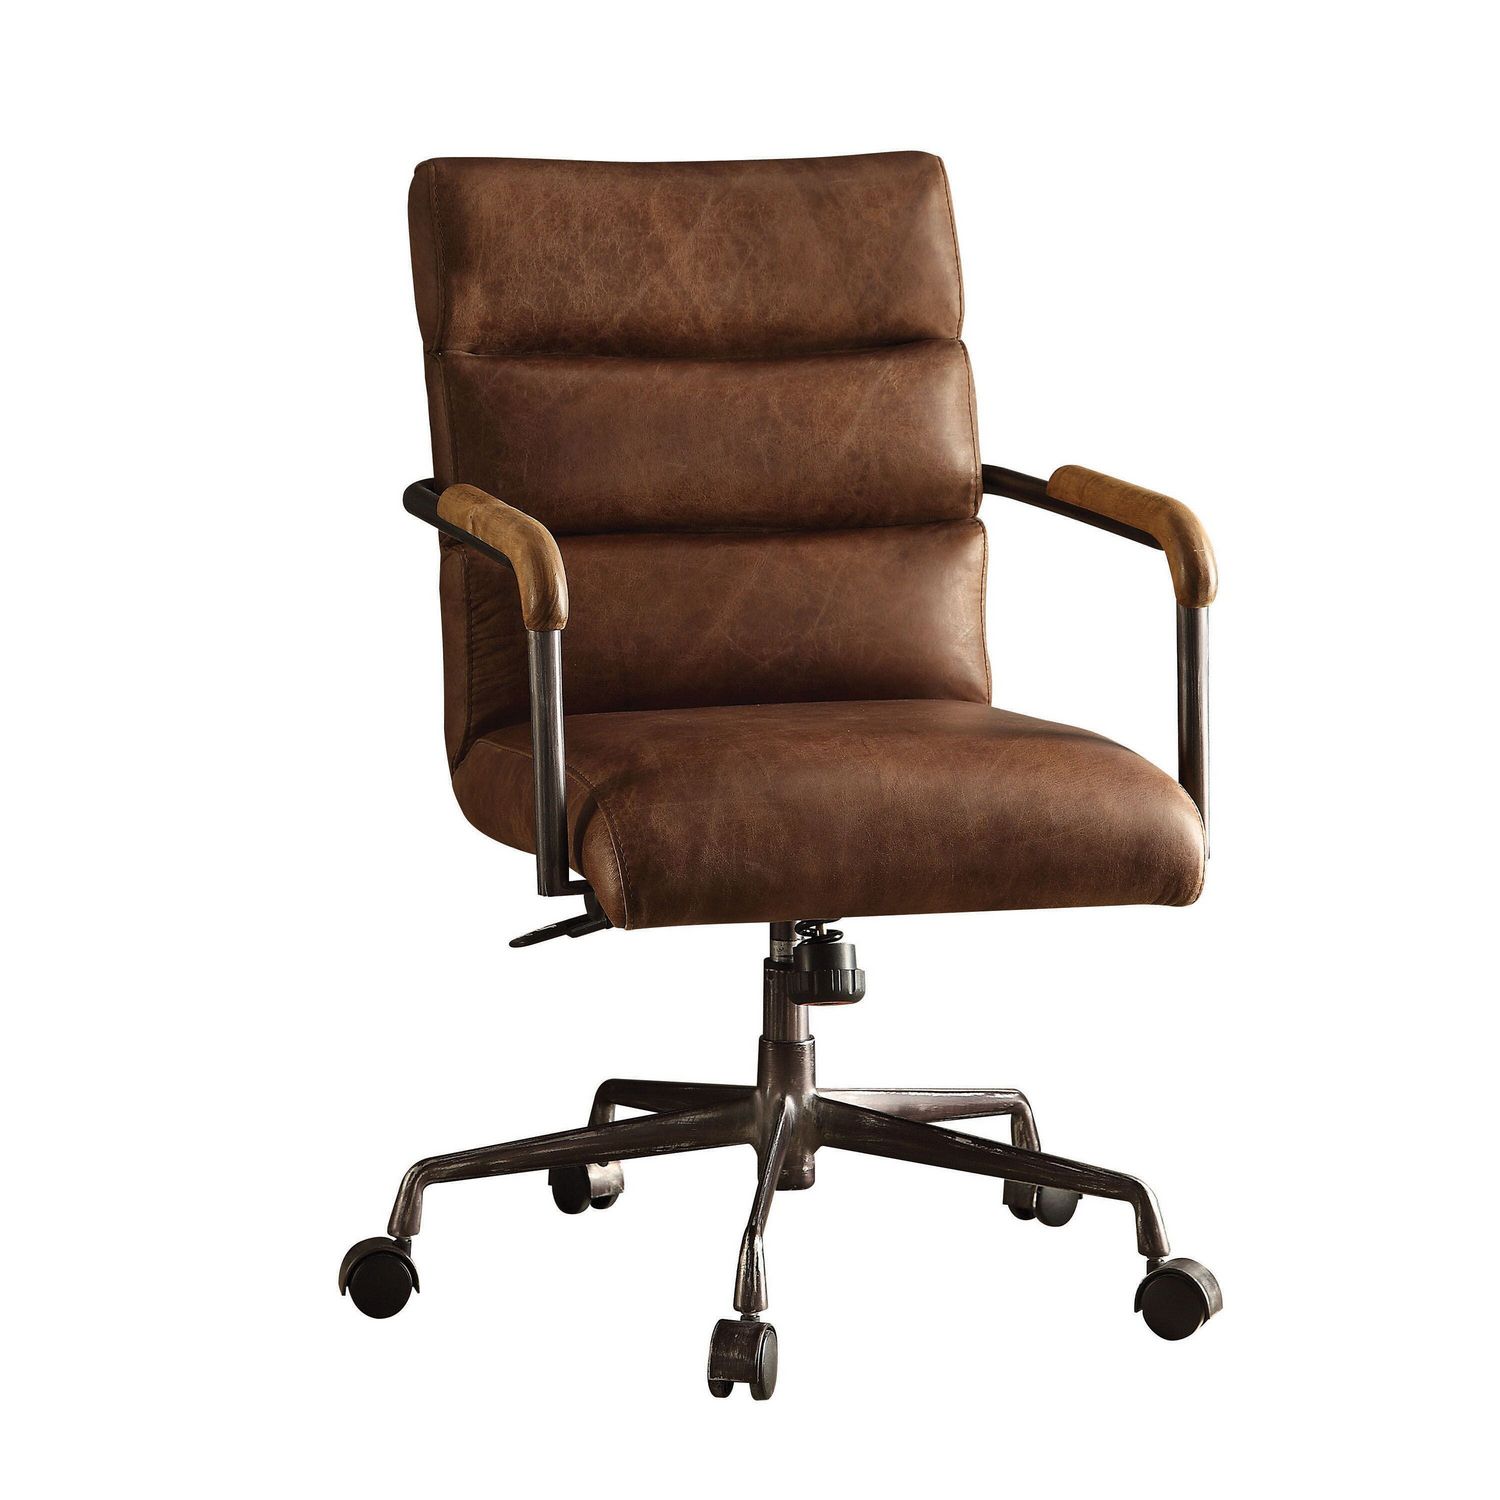 Acme Harith Executive Office Chair In, Top Grain Leather Office Chair